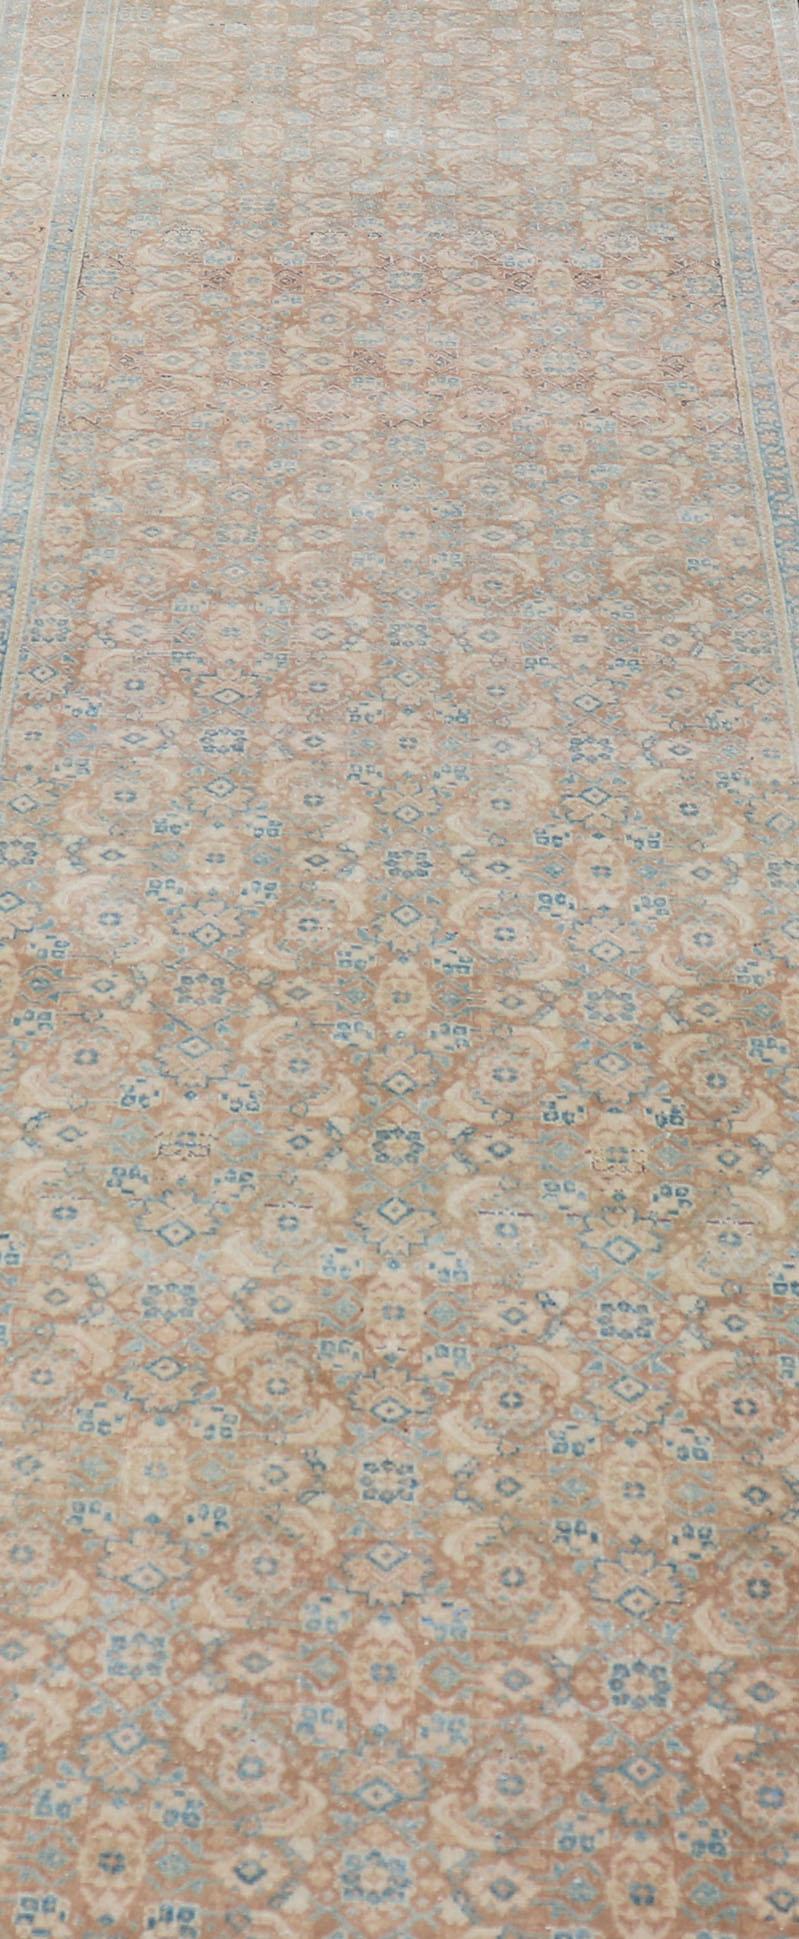 Vintage Persian Tabriz Runner with All-Over Floral Design in Tan and Blue For Sale 1